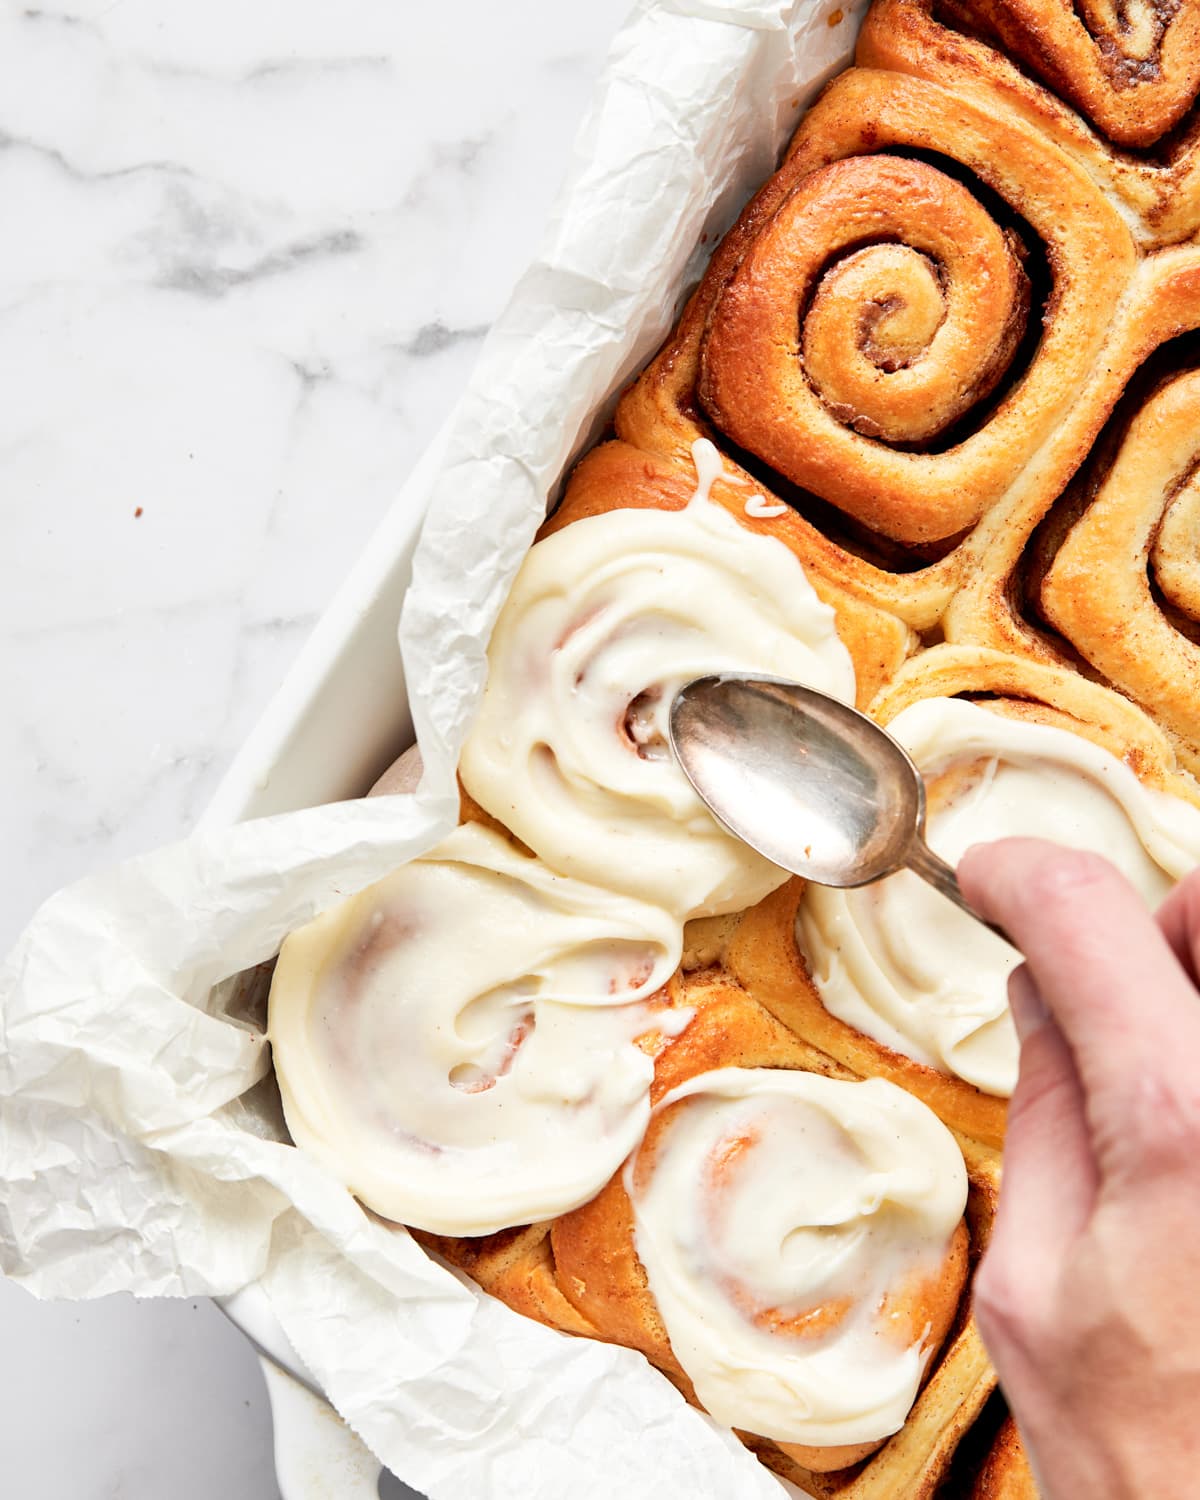 cream cheese icing being spread over warm cinnamon rolls.